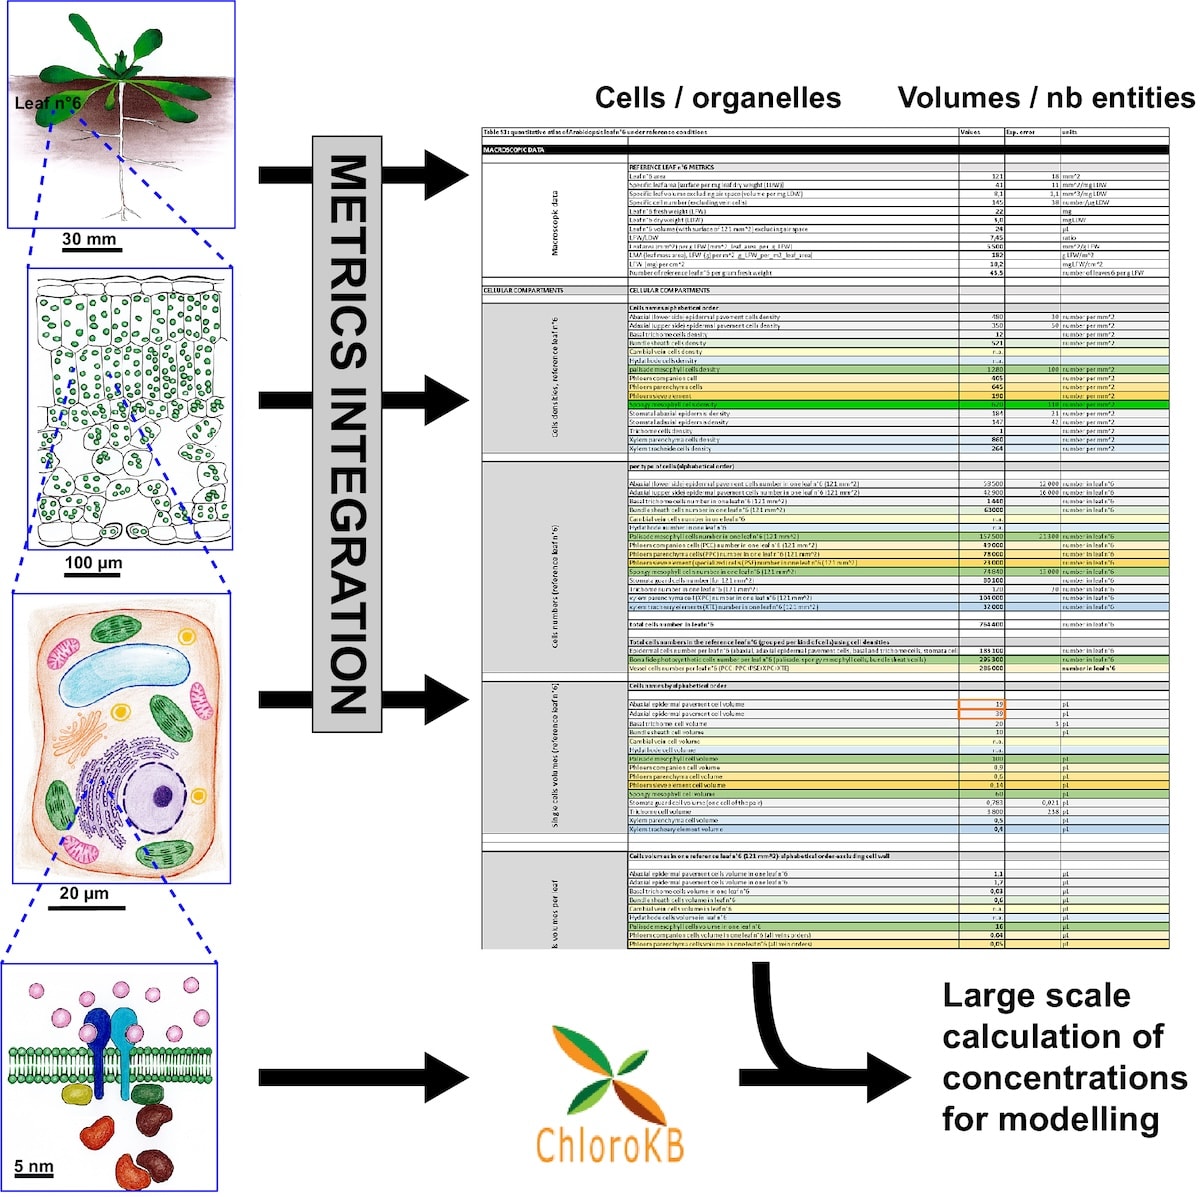 Congrats to our @EUeic project partner, @CEA_Officiel, on publishing a groundbreaking “Arabidopsis leaf quantitative atlas”! 🌿📚 “It sets the stage for transformative insights into plant metabolism,' say the authors. #PlantResearch #AgriculturalInnovation #Arabidopsis